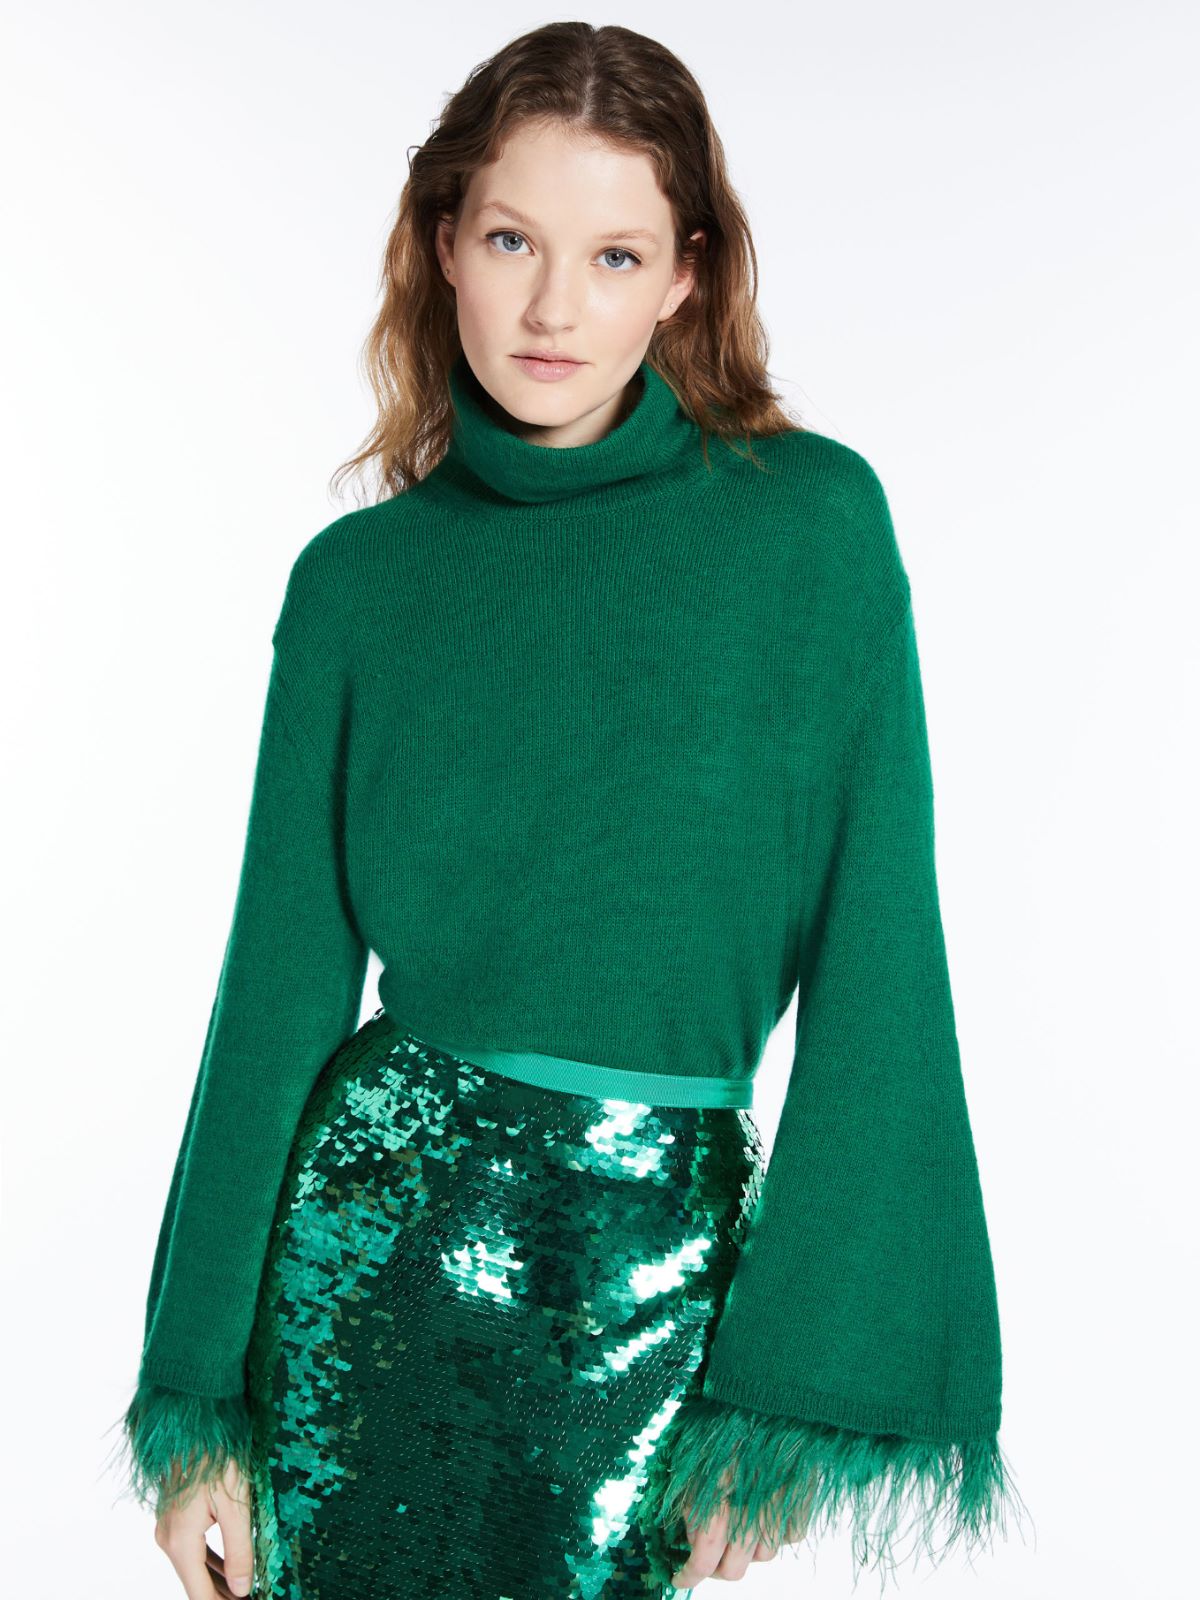 Feather-detail mohair cropped sweater - EMERALD - Weekend Max Mara - 4